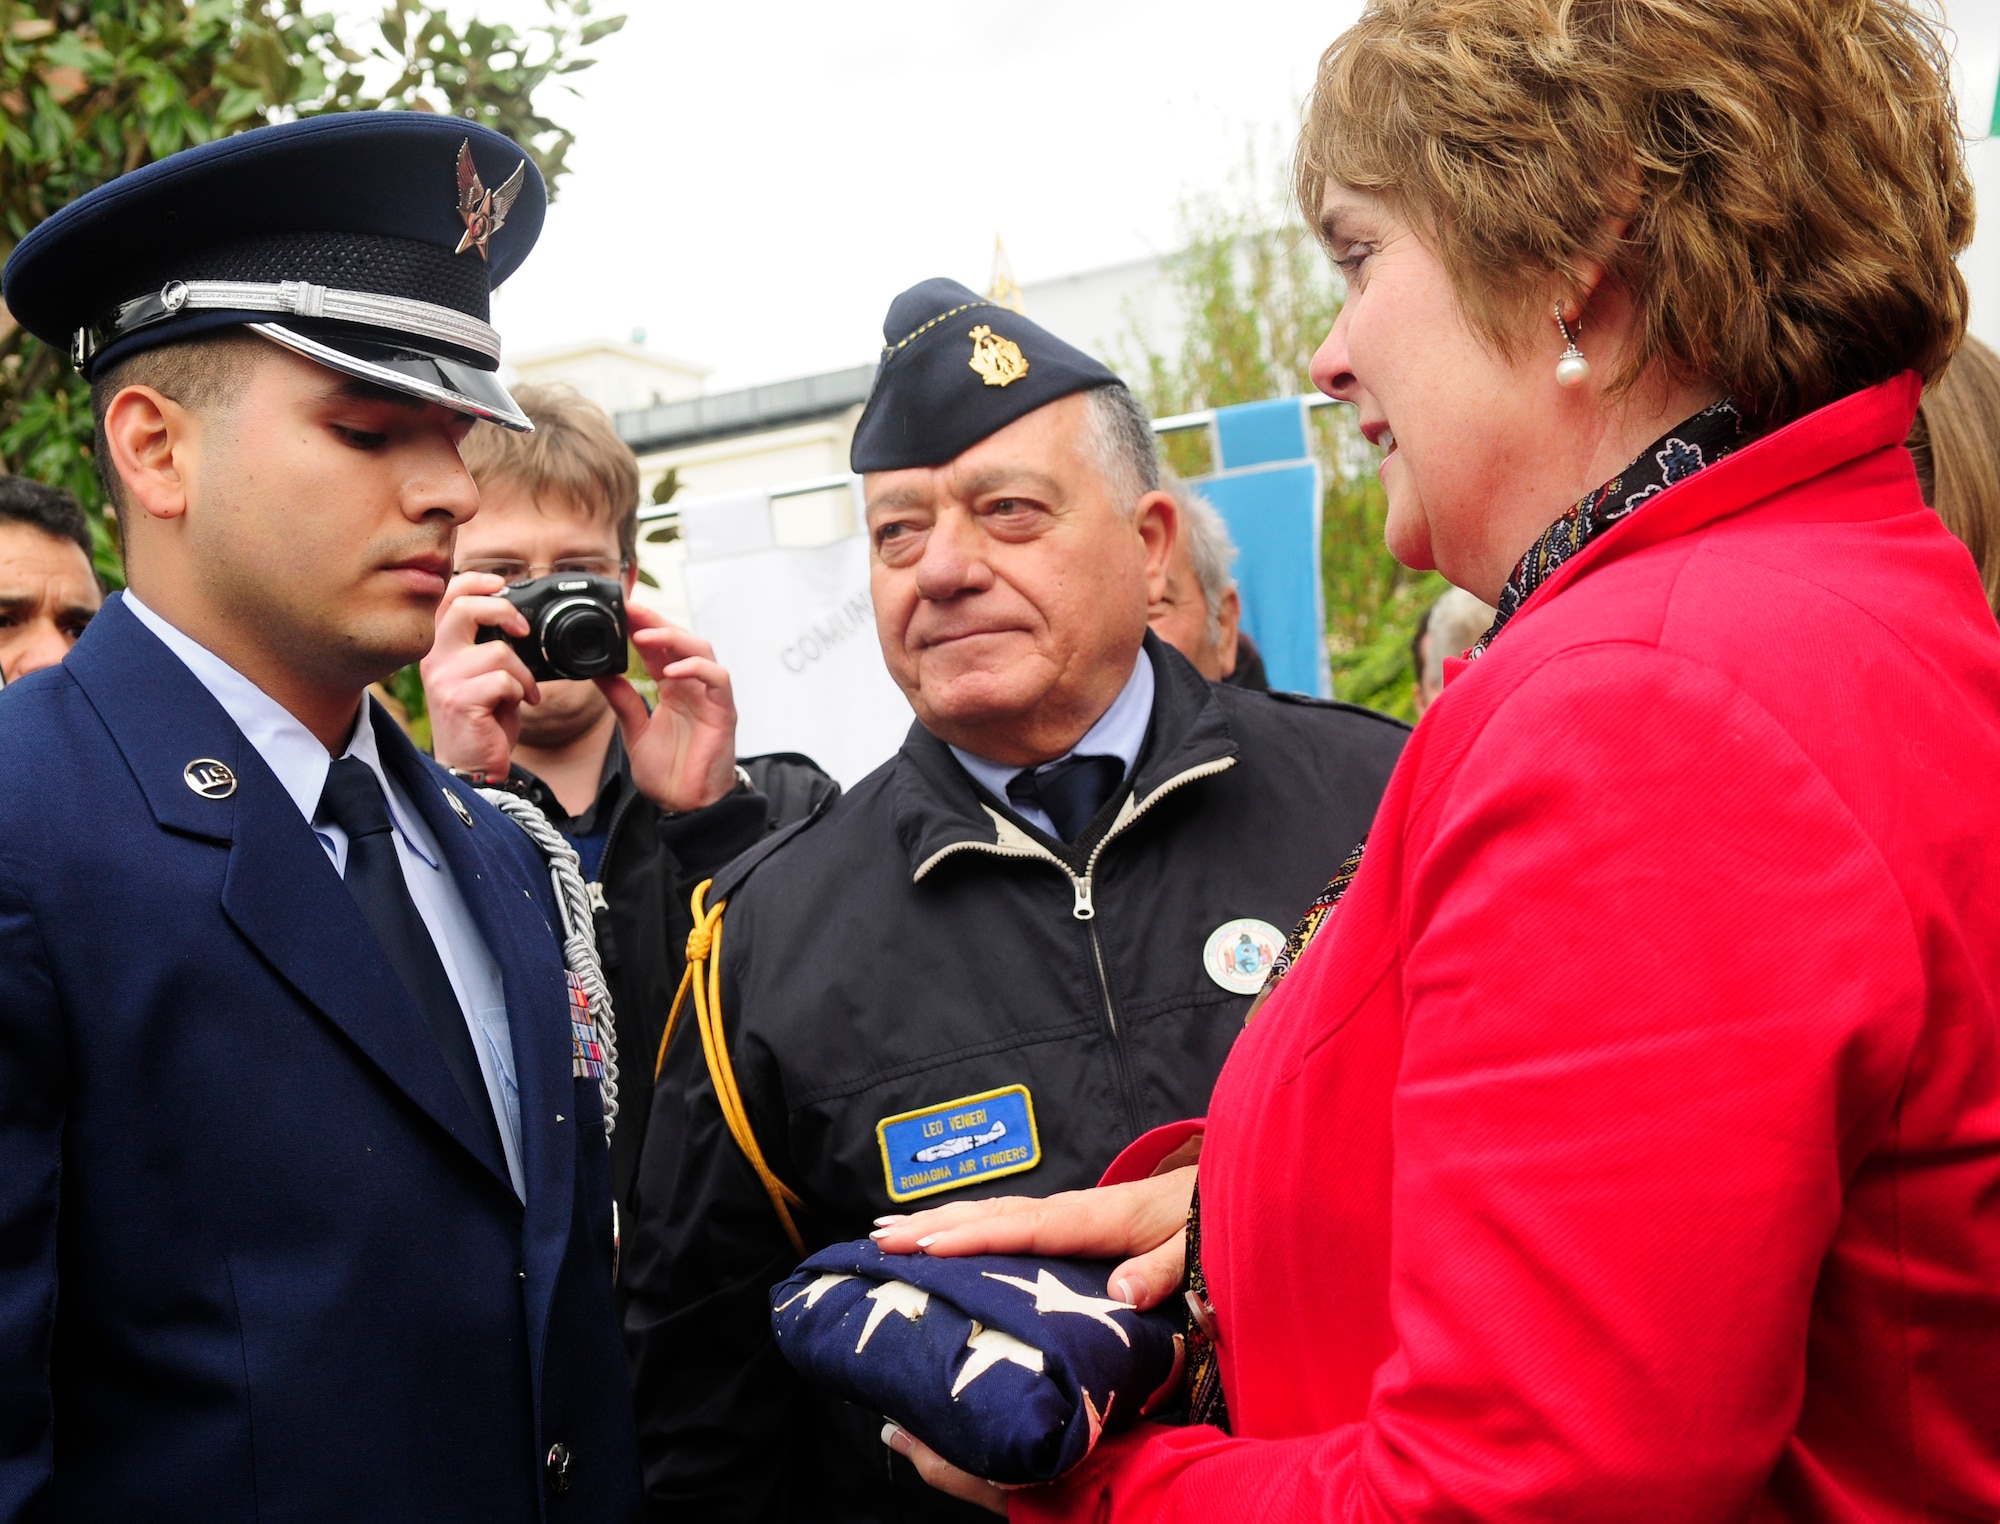 A member of the Aviano Air Base Honor Guard presents an American Flag to Linda Tagert, niece of Maj. Hugh Muse, Jr., during a remembrance ceremony April 14 at Vighizzolo D’Este, Italy. The remembrance ceremony was held to honor Muse, a World War II pilot who was shot down over Northern Italy on Dec. 25, 1943. (U.S. Air Force photo/Airman 1st Class Briana Jones)